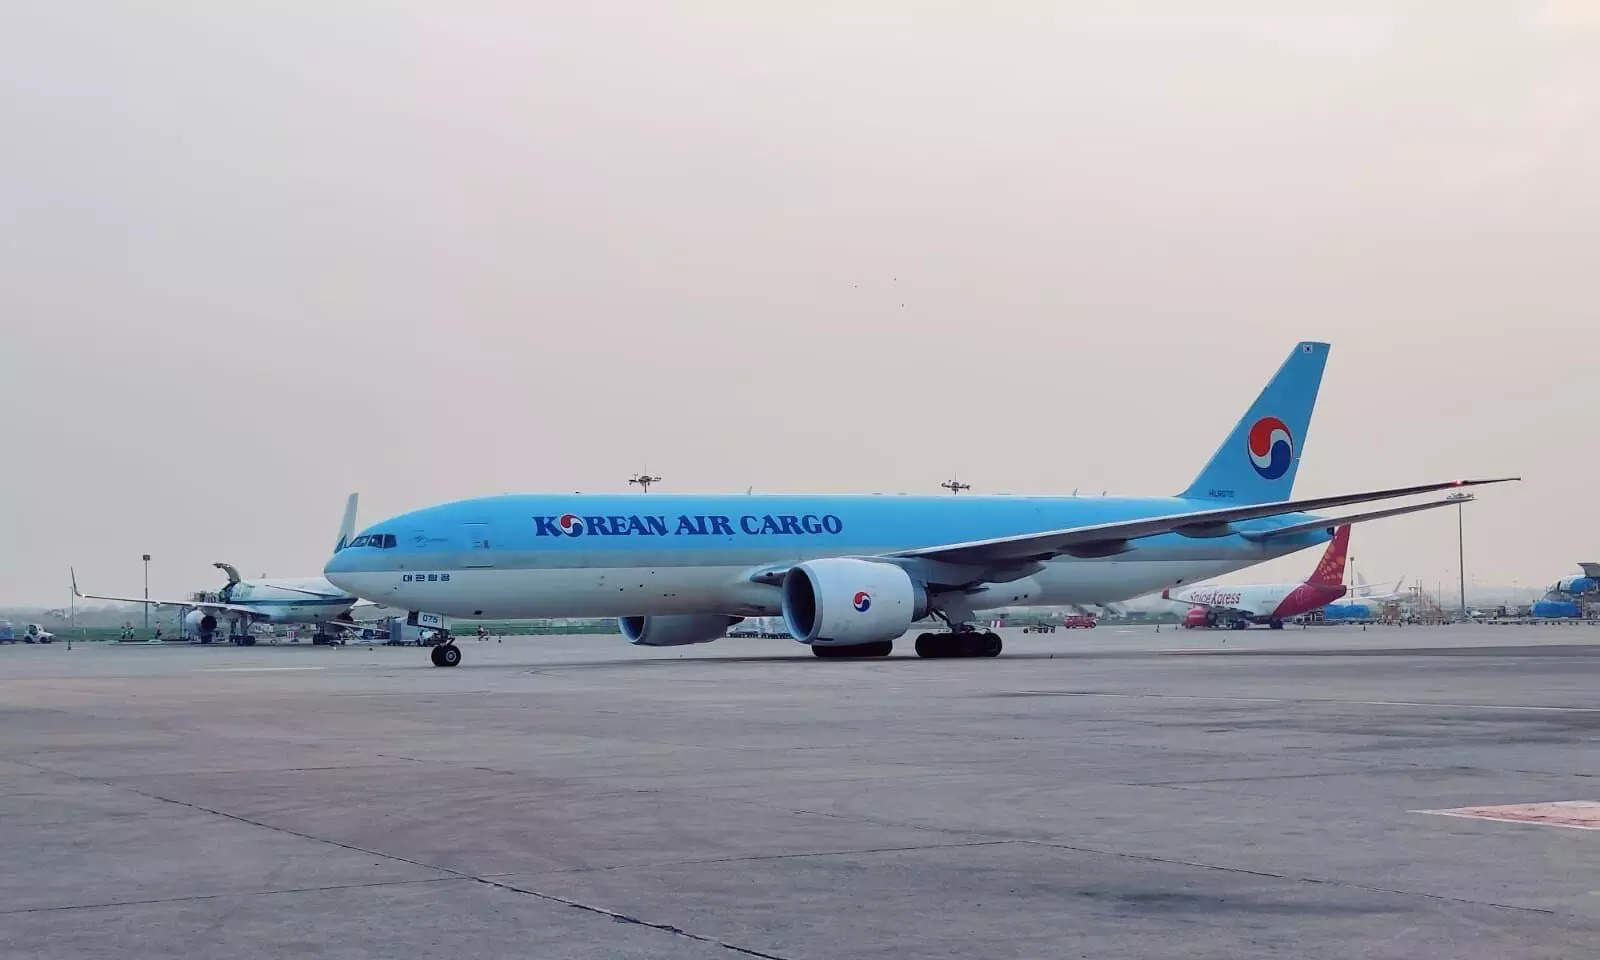 The arrival of the first Koren Air Cargo Boeing 777 freighter after the service resumption at Delhi International Airport on Wednesday, July 6, 2022.